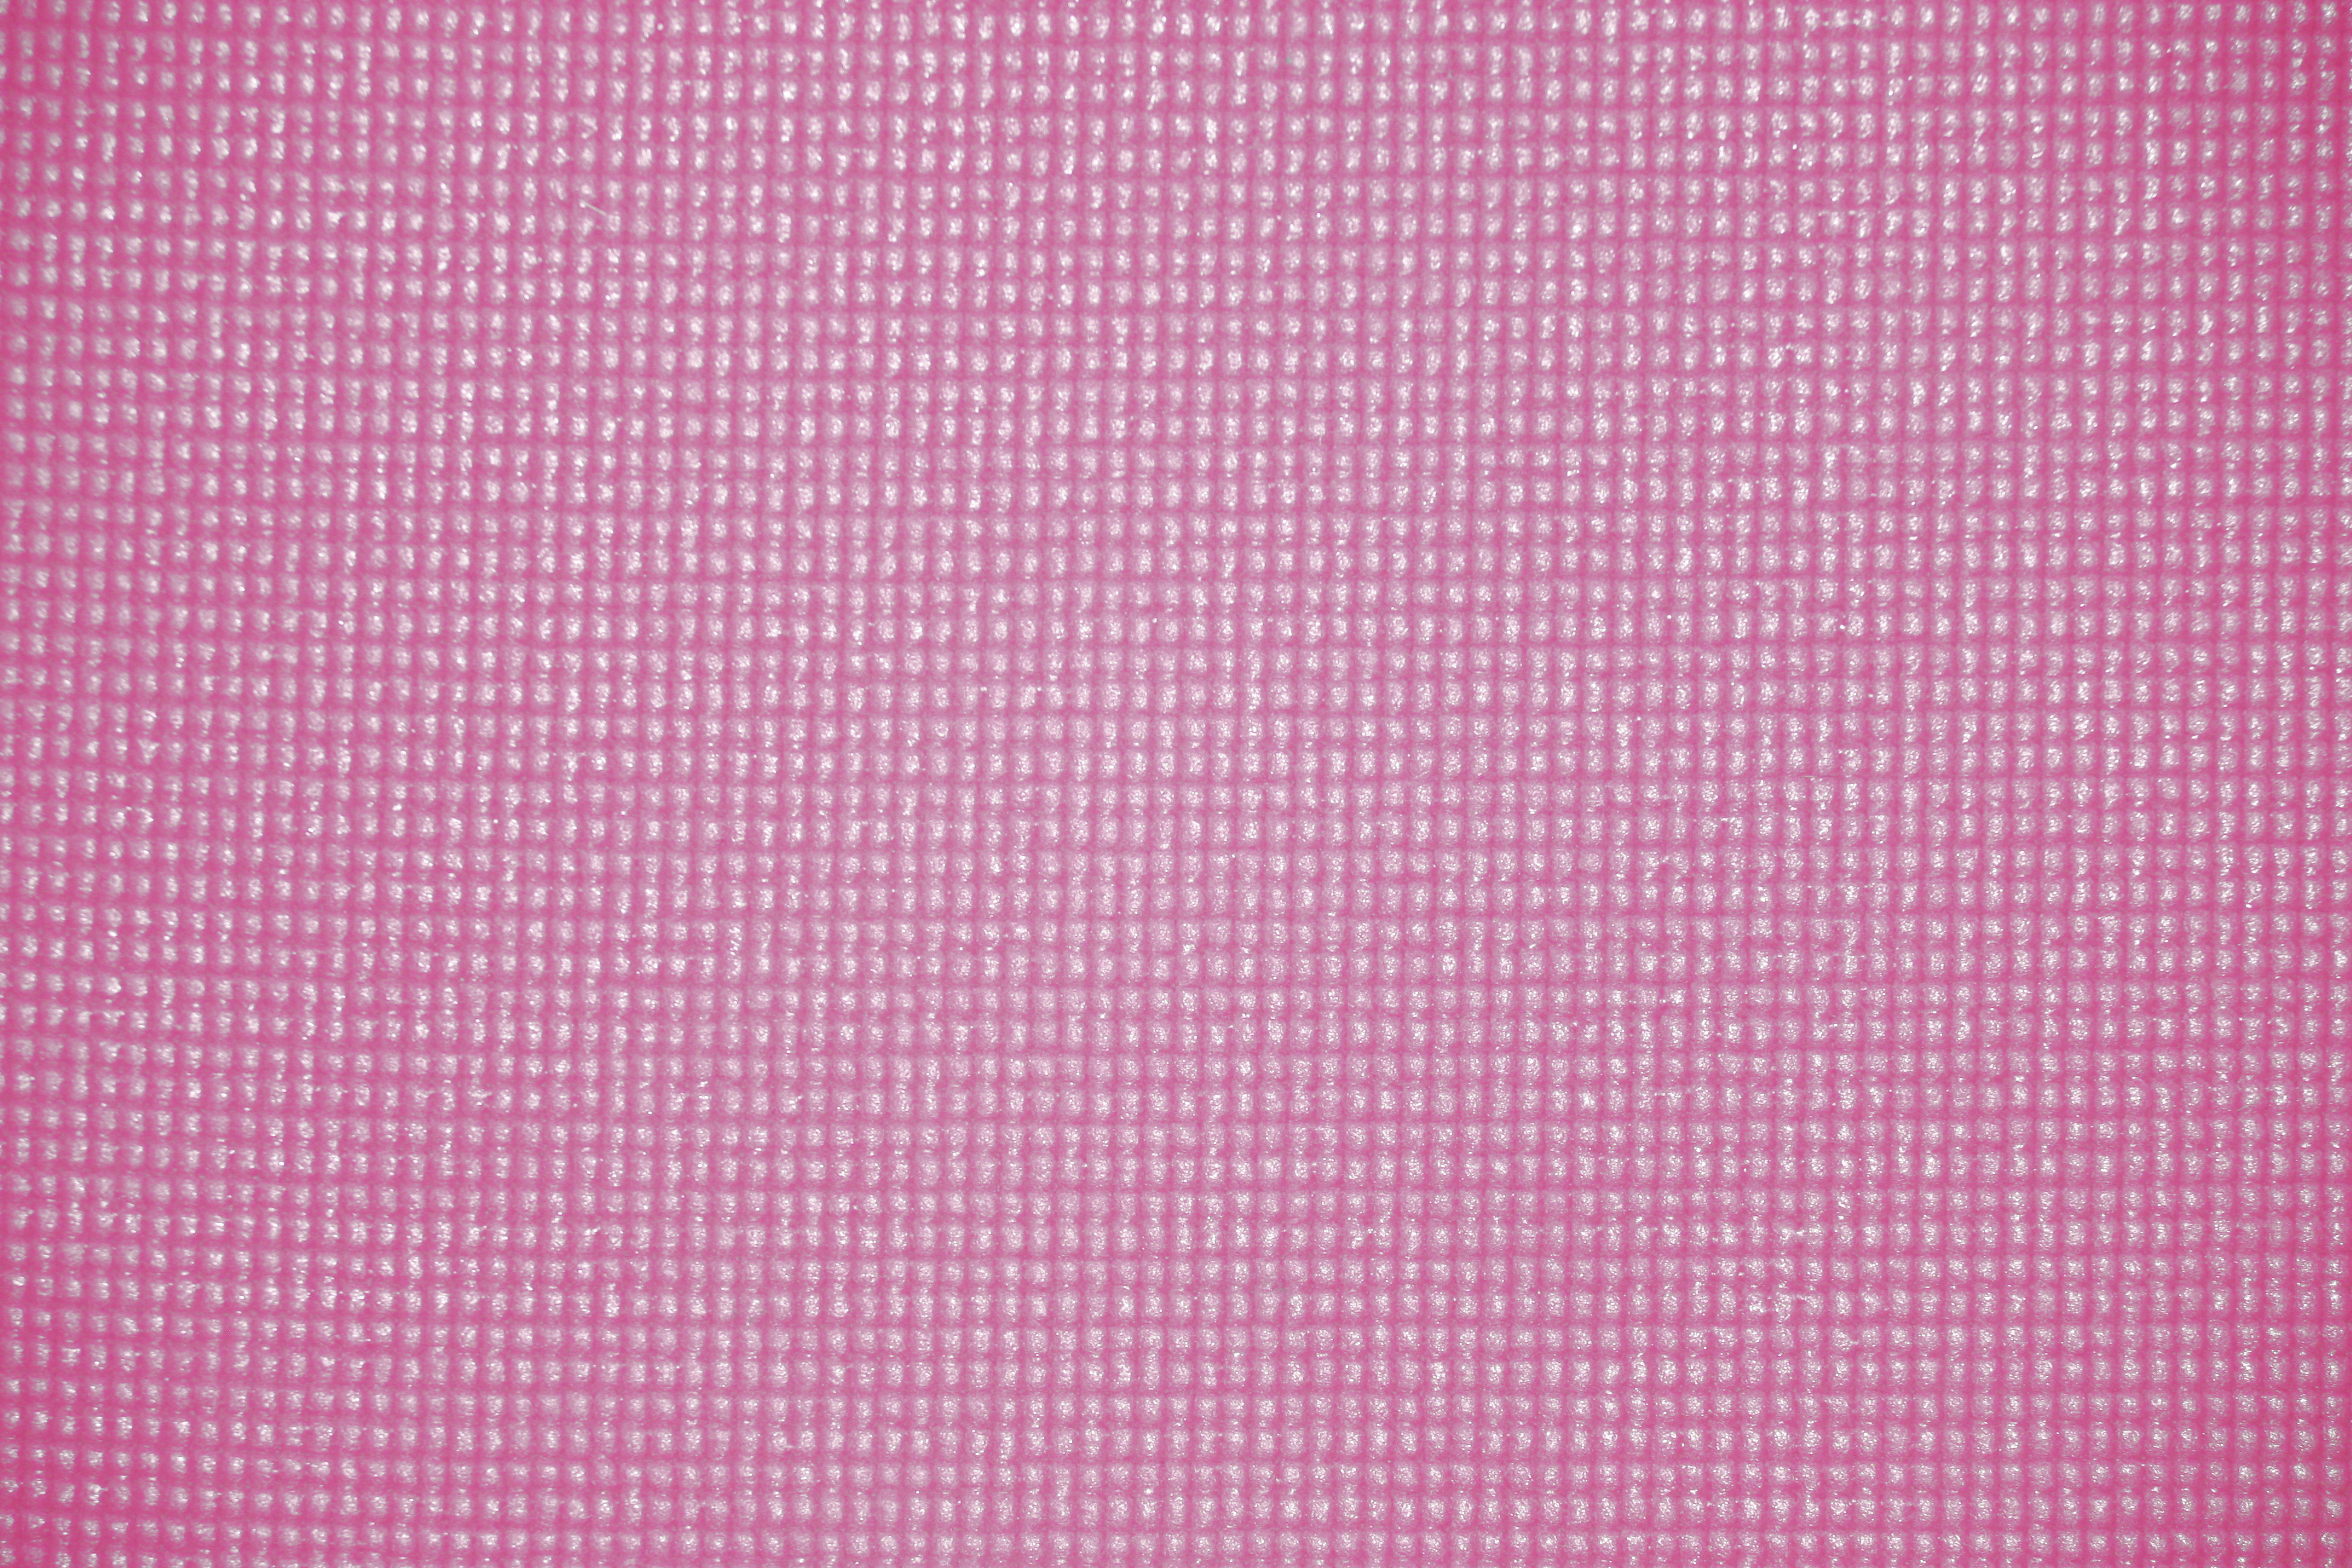 Pink Yoga Exercise Mat Texture Picture, Free Photograph